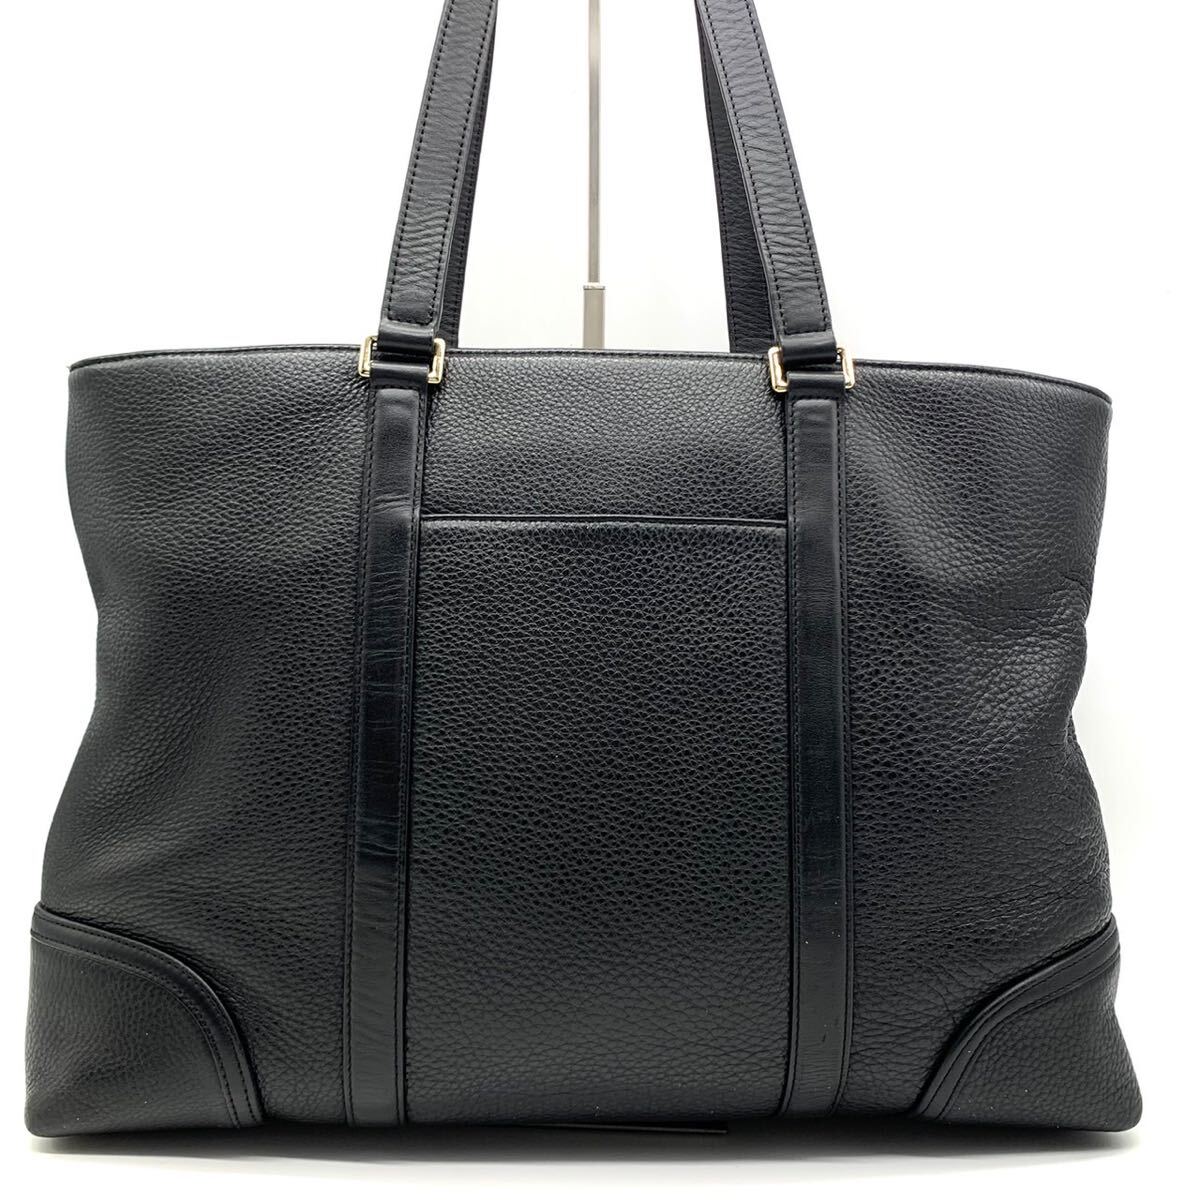 1 jpy * ultimate beautiful goods / regular price 8 ten thousand *Paul Smith Paul Smith tote bag business bag shoulder shoulder ..* A4 storage wrinkle leather car f leather black men's 